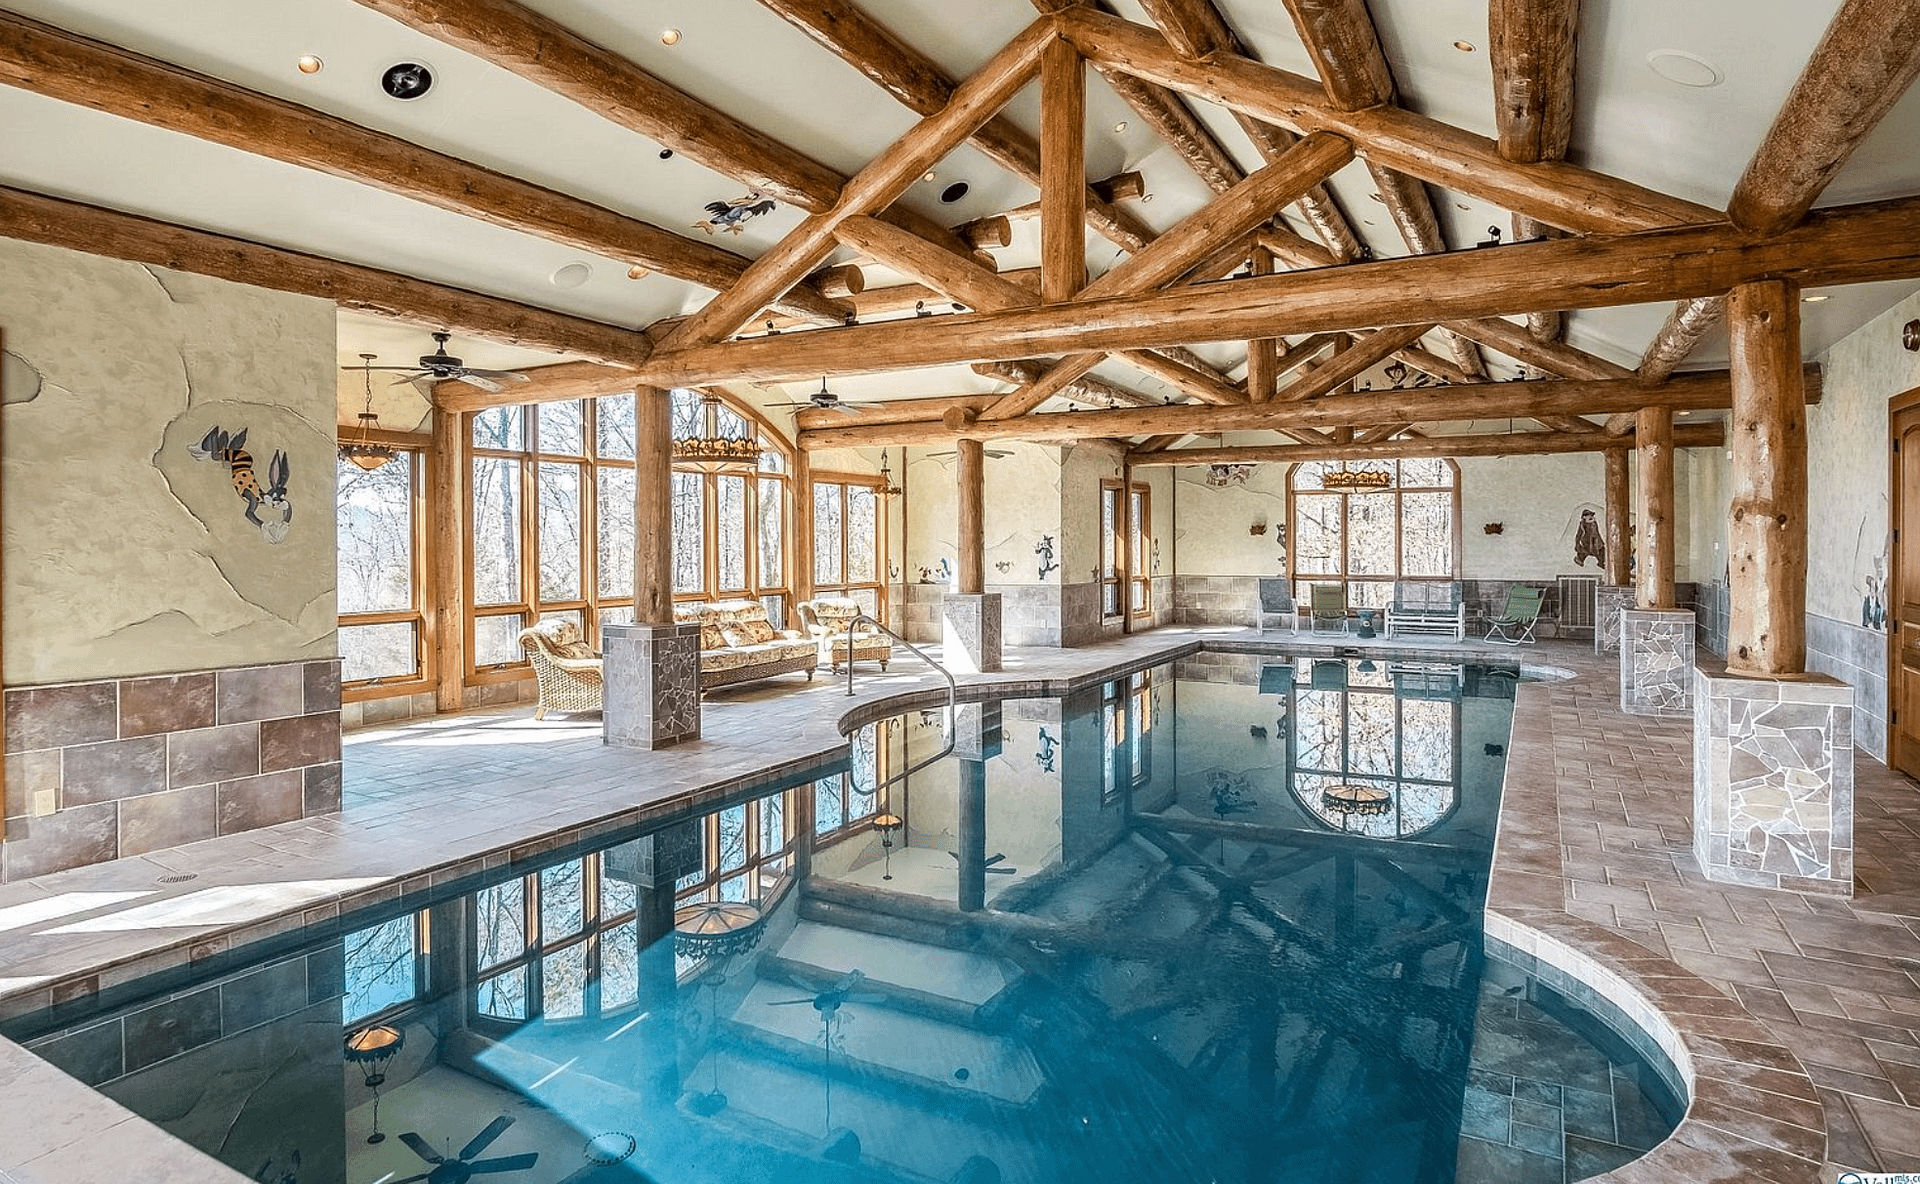 Alabama Log Home On 176 Acres With Indoor Pool (PHOTOS)